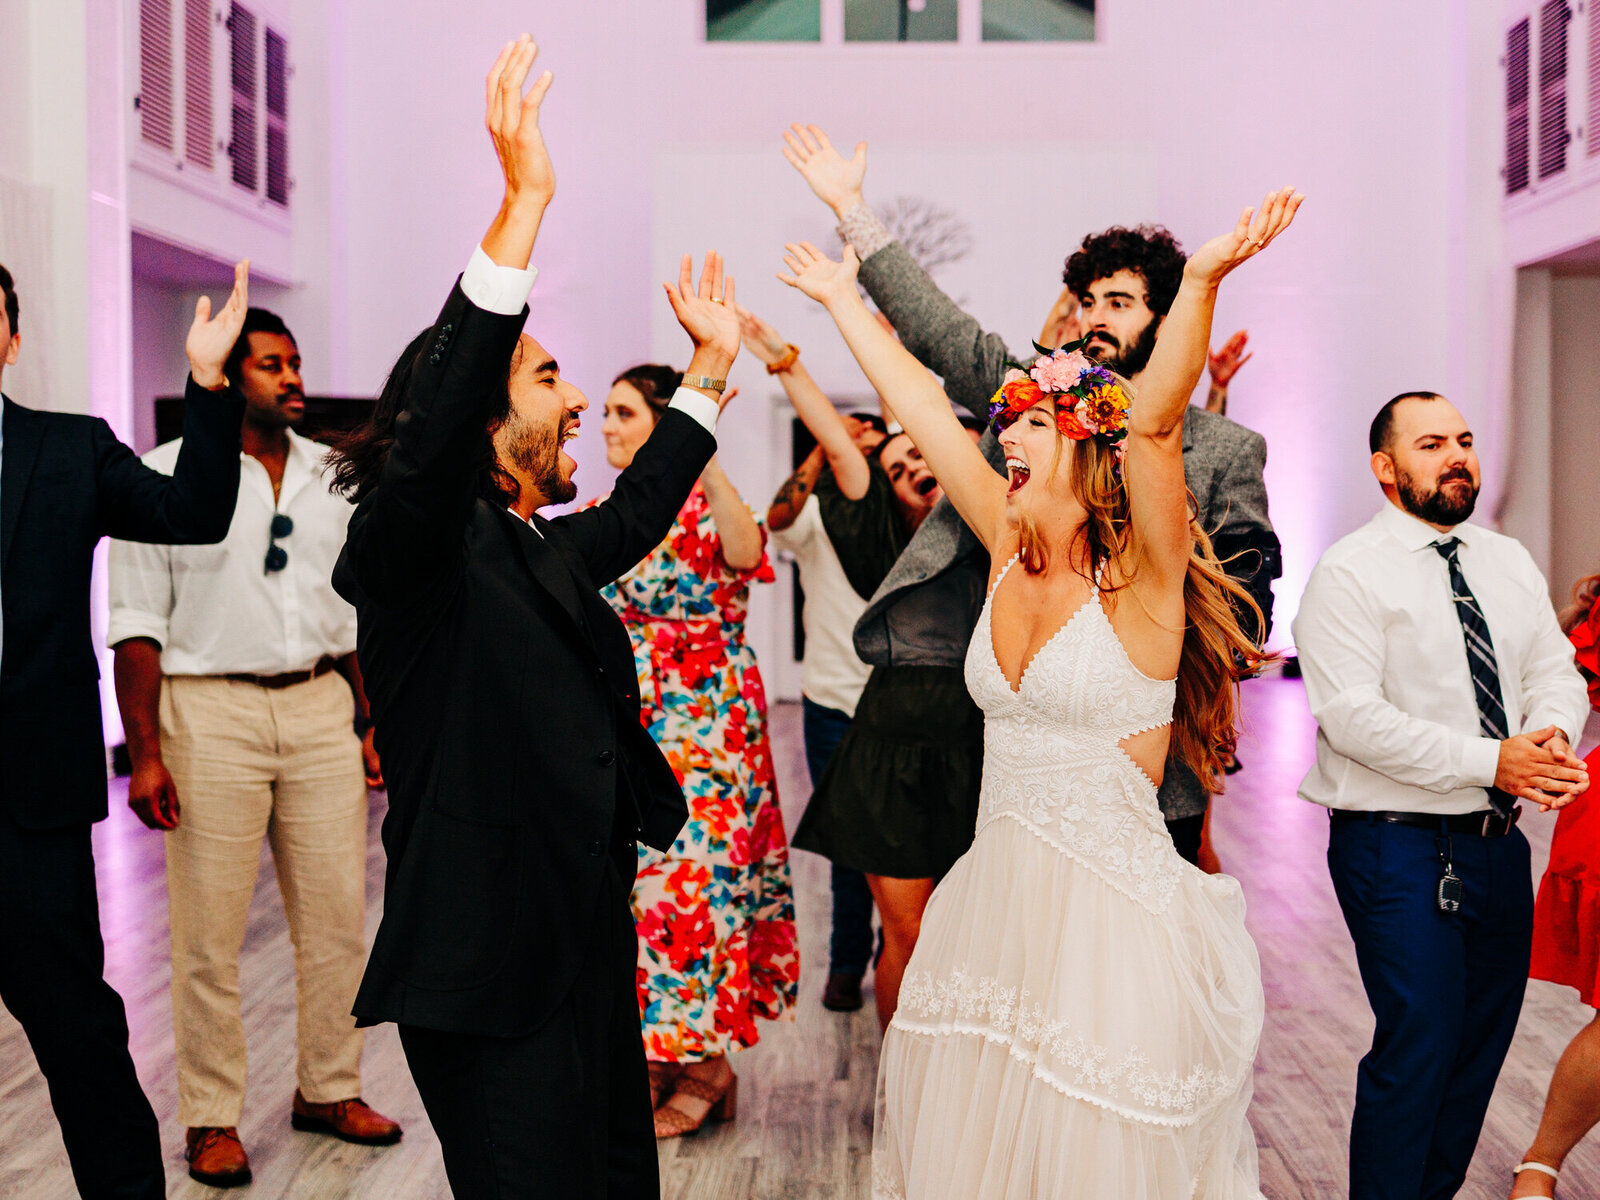 A bride and a groom dance to the YMCA during their wedding reception. The image, taken by wedding photographer KD Captures, also features some of the couple's guests dancing as well.